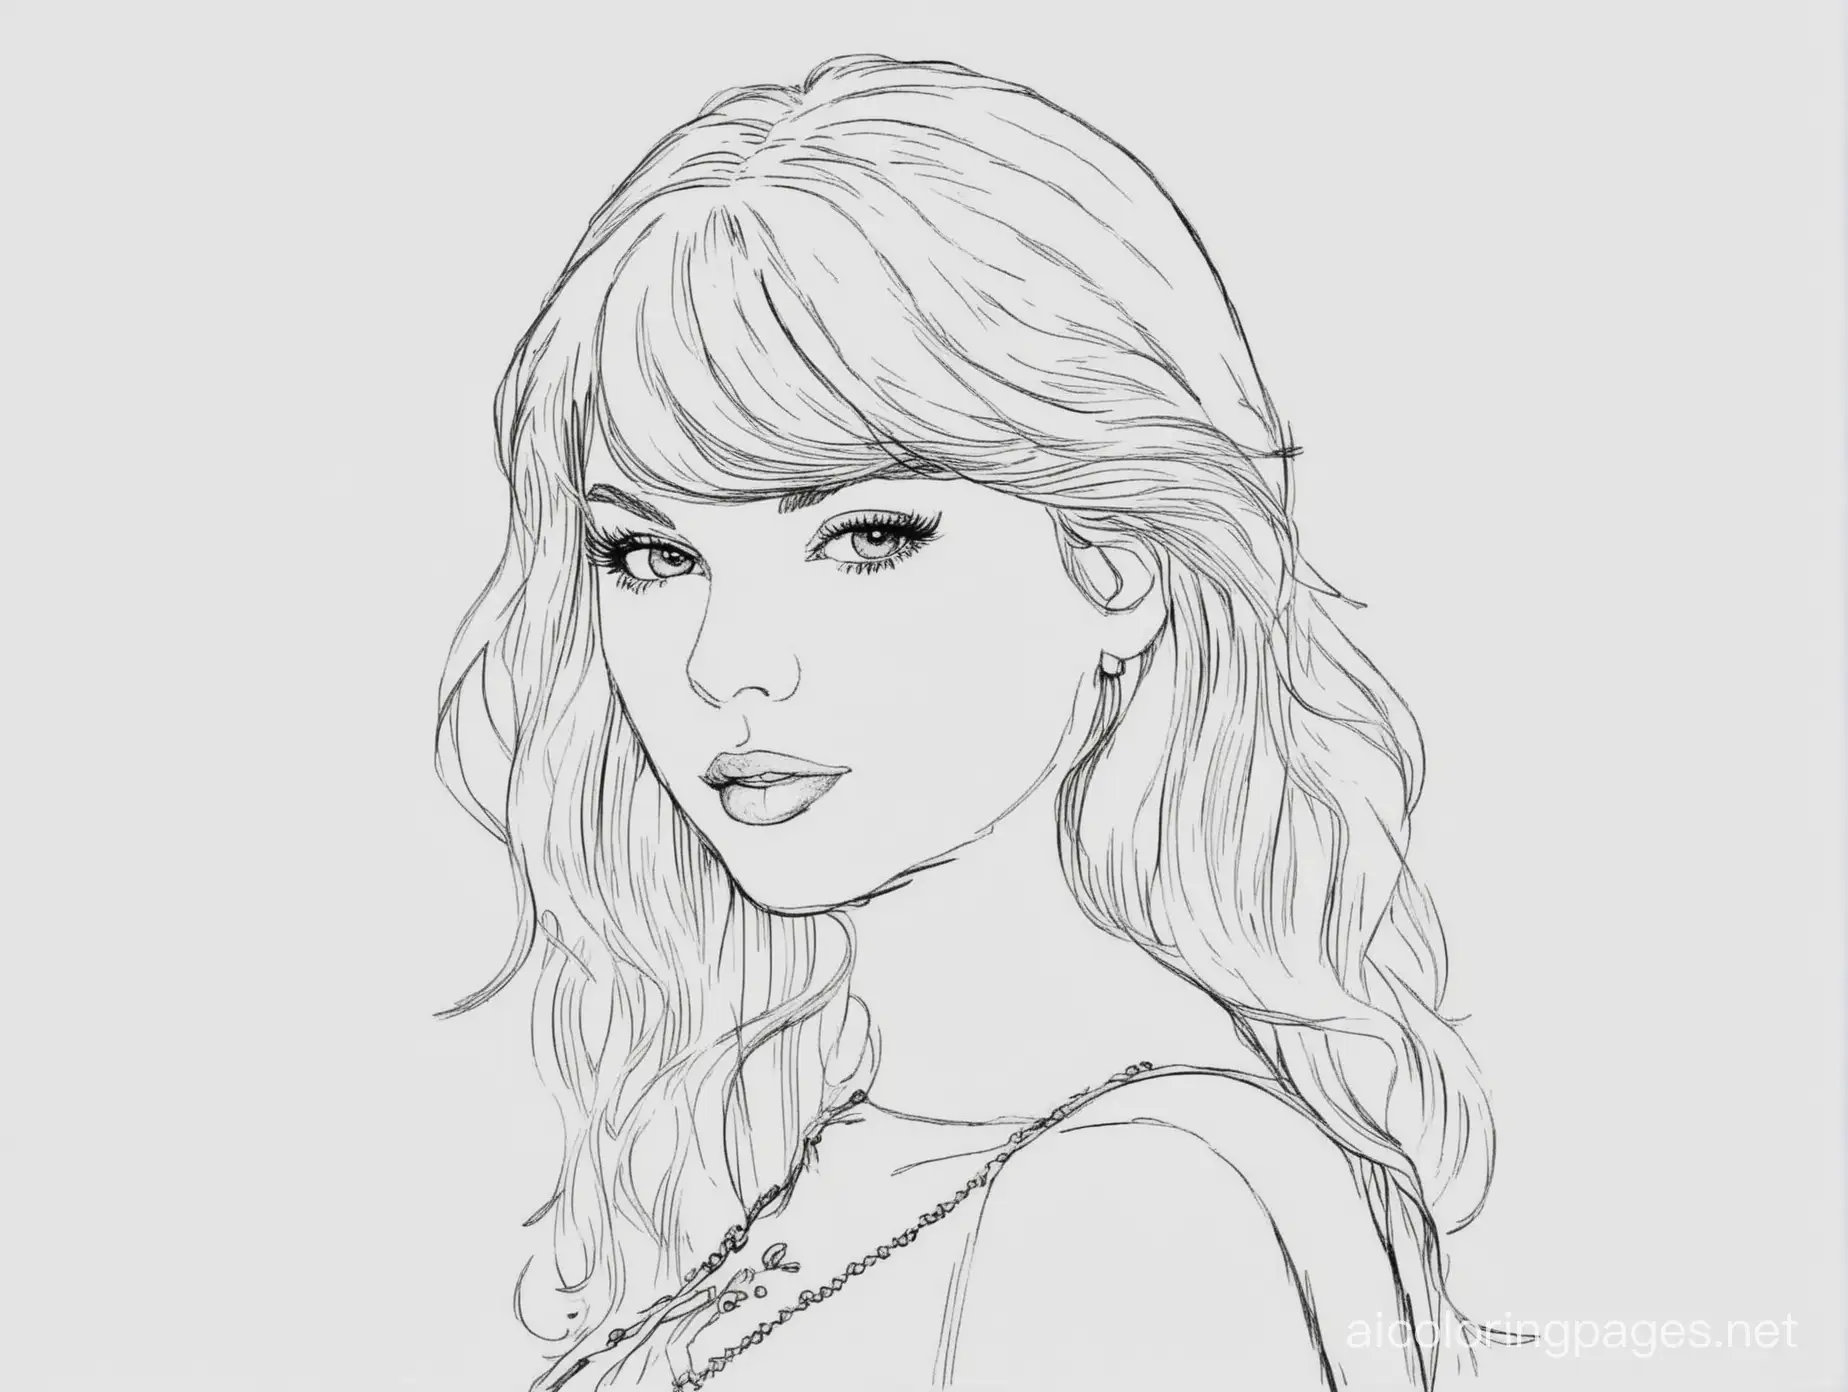 Taylor Swift silhouette coloring page, Coloring Page, black and white, line art, white background, Simplicity, Ample White Space. The background of the coloring page is plain white to make it easy for young children to color within the lines. The outlines of all the subjects are easy to distinguish, making it simple for kids to color without too much difficulty